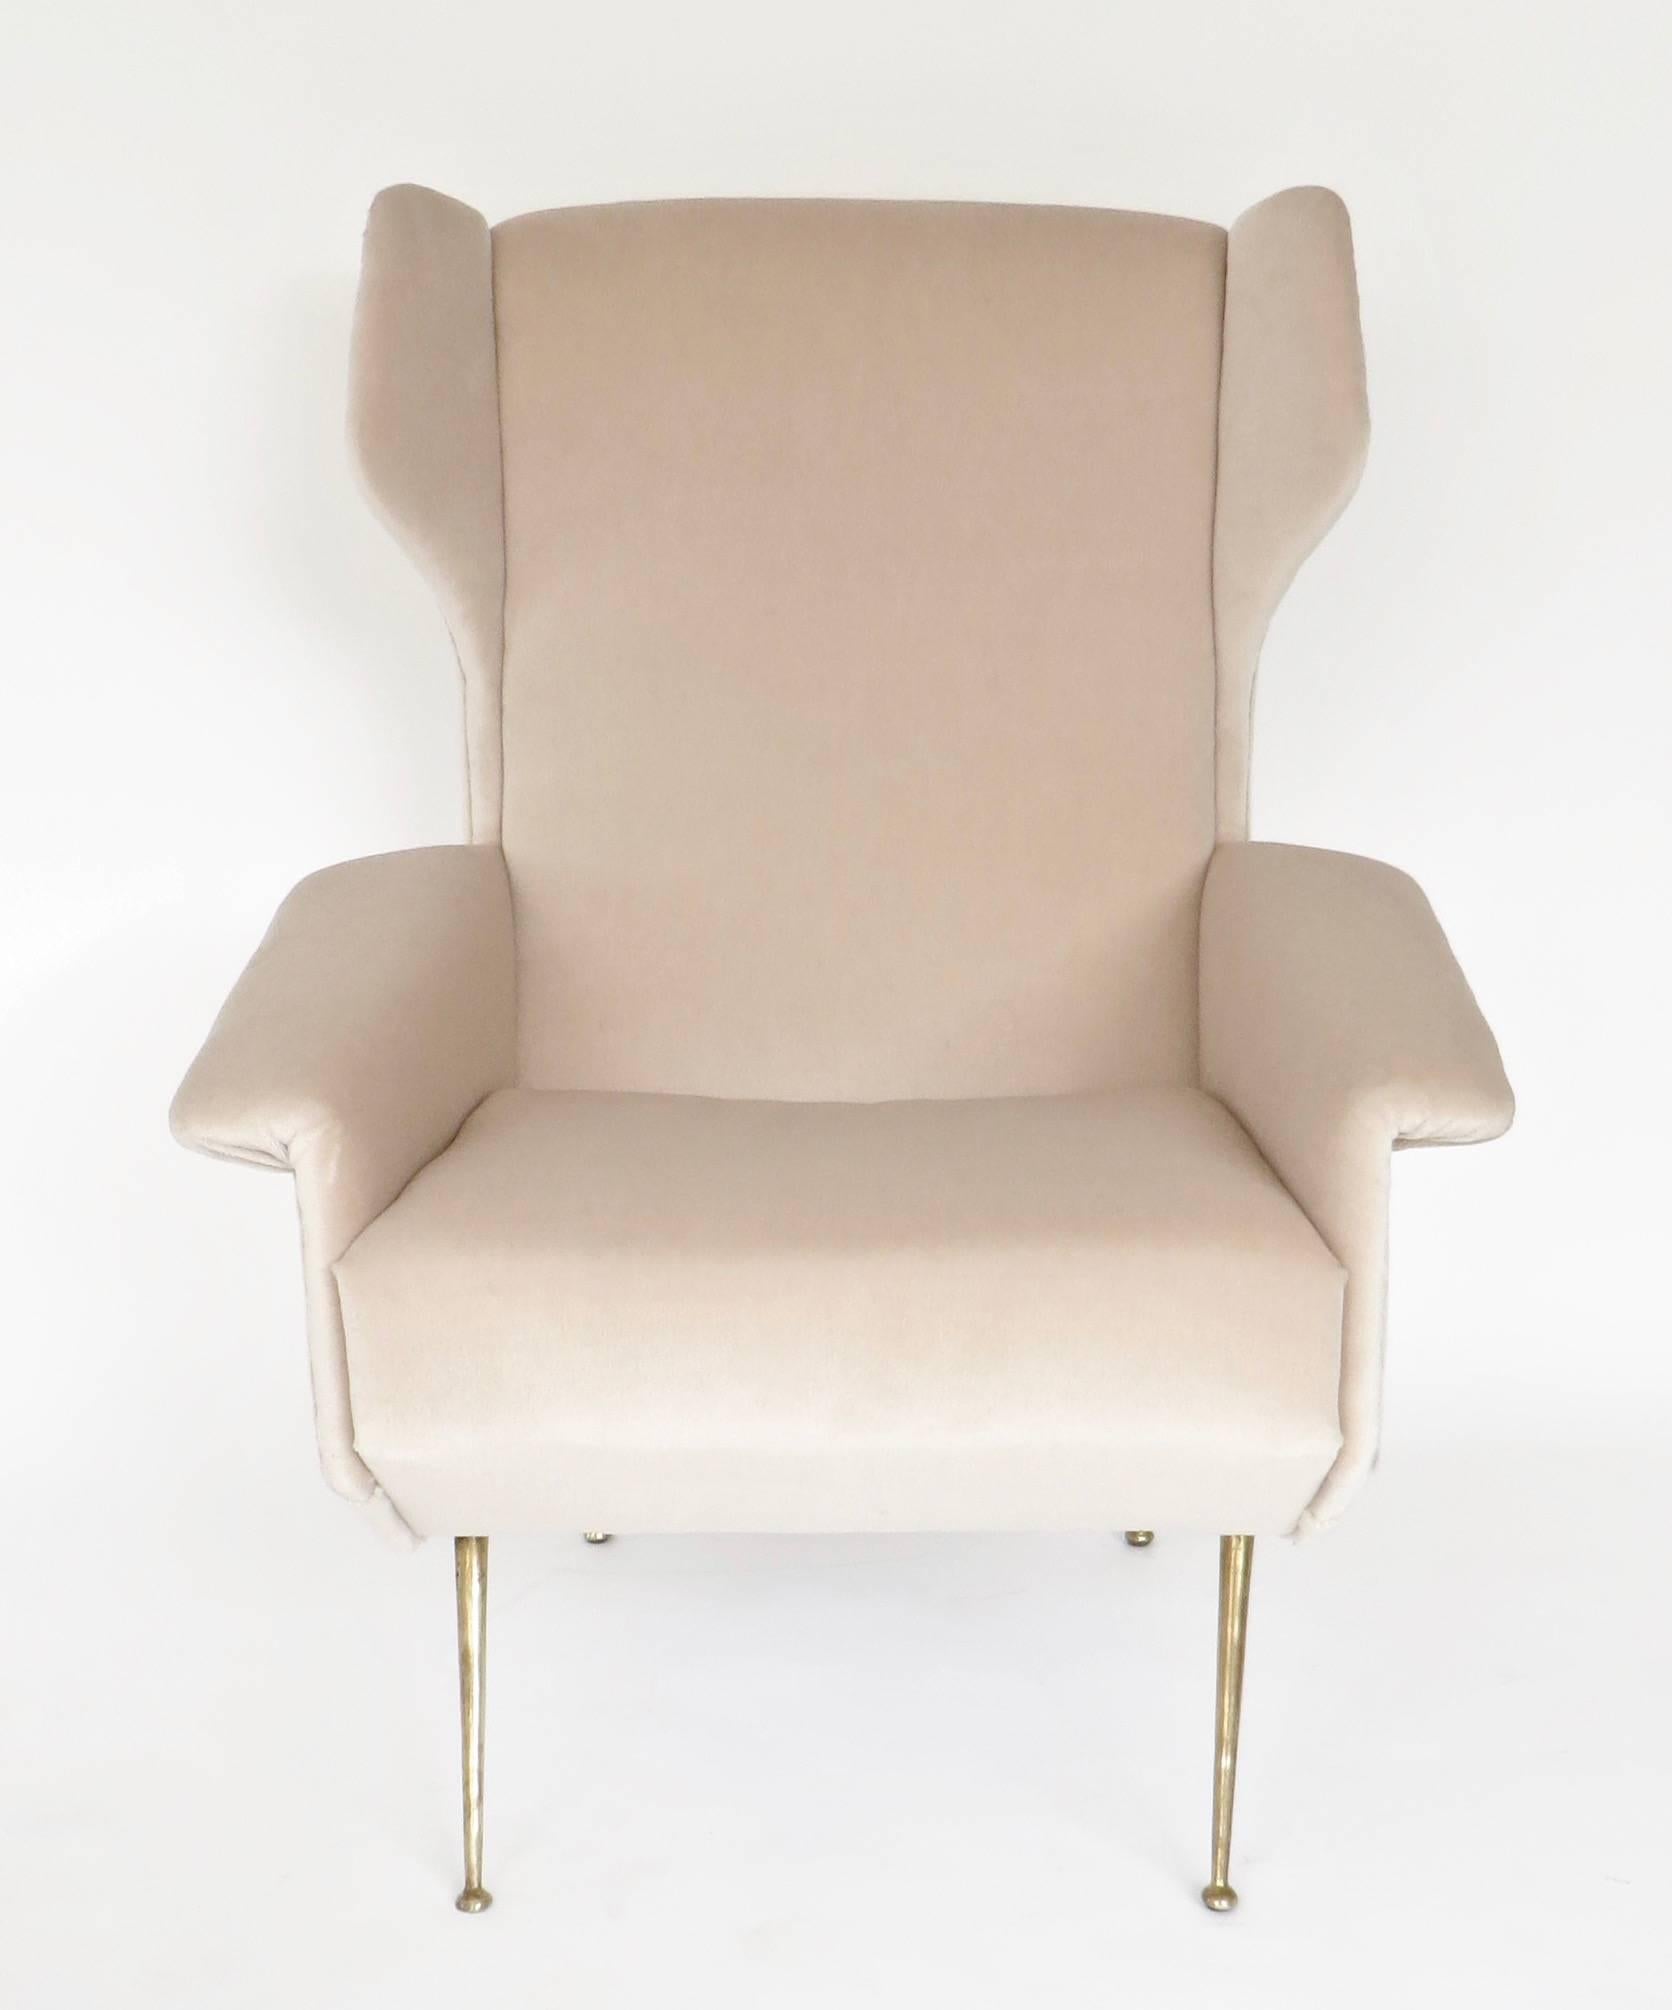 Mid-Century Modern Italian Upholstered Wingback Lounge Chair with Brass Legs and Feet